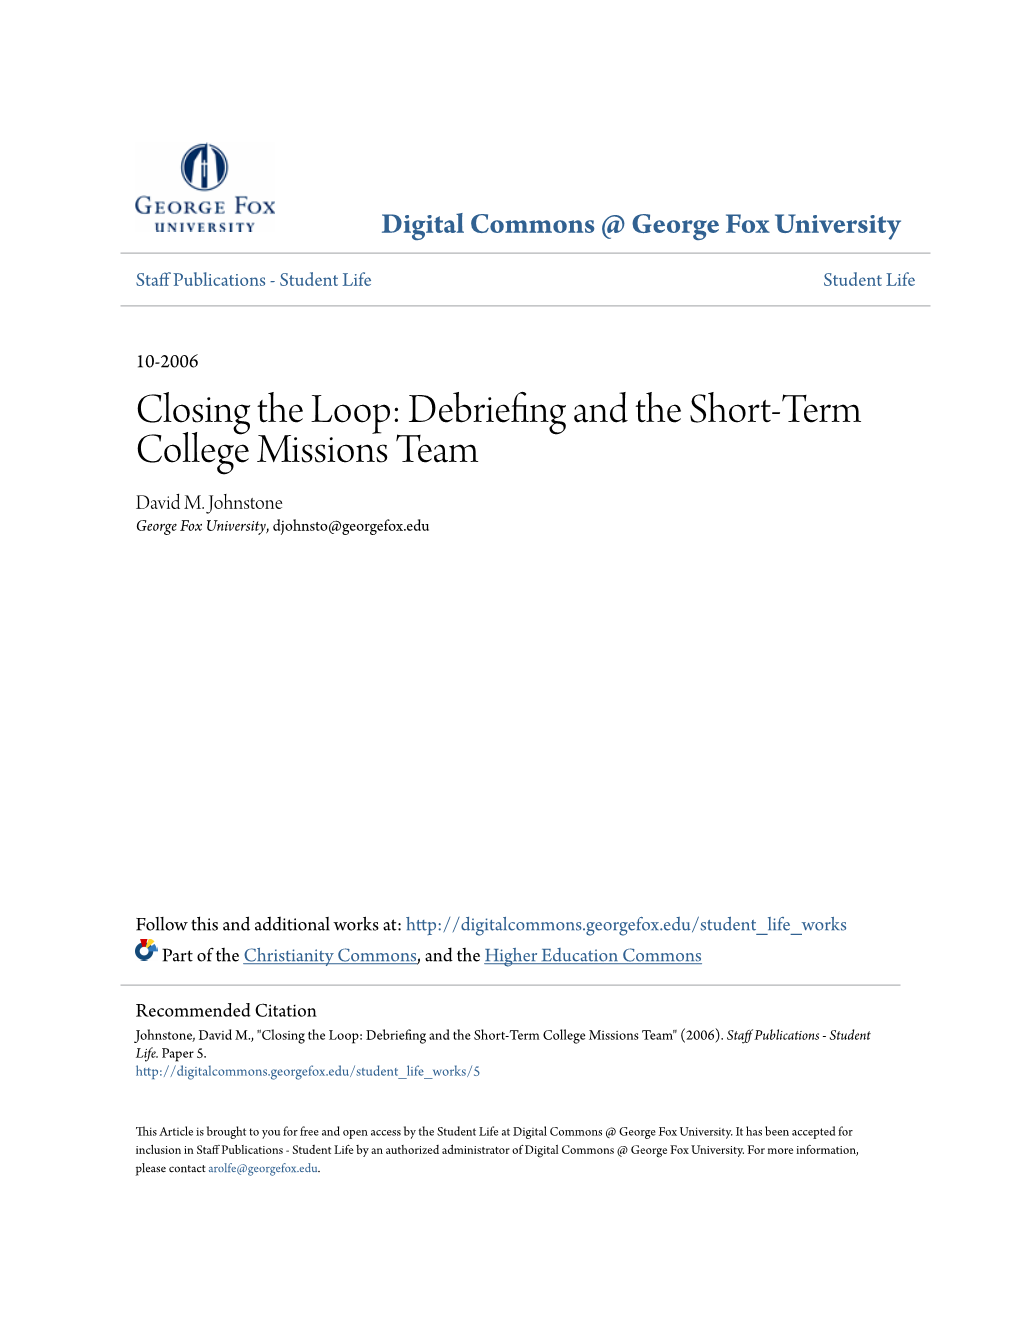 Closing the Loop: Debriefing and the Short-Term College Missions Team David M